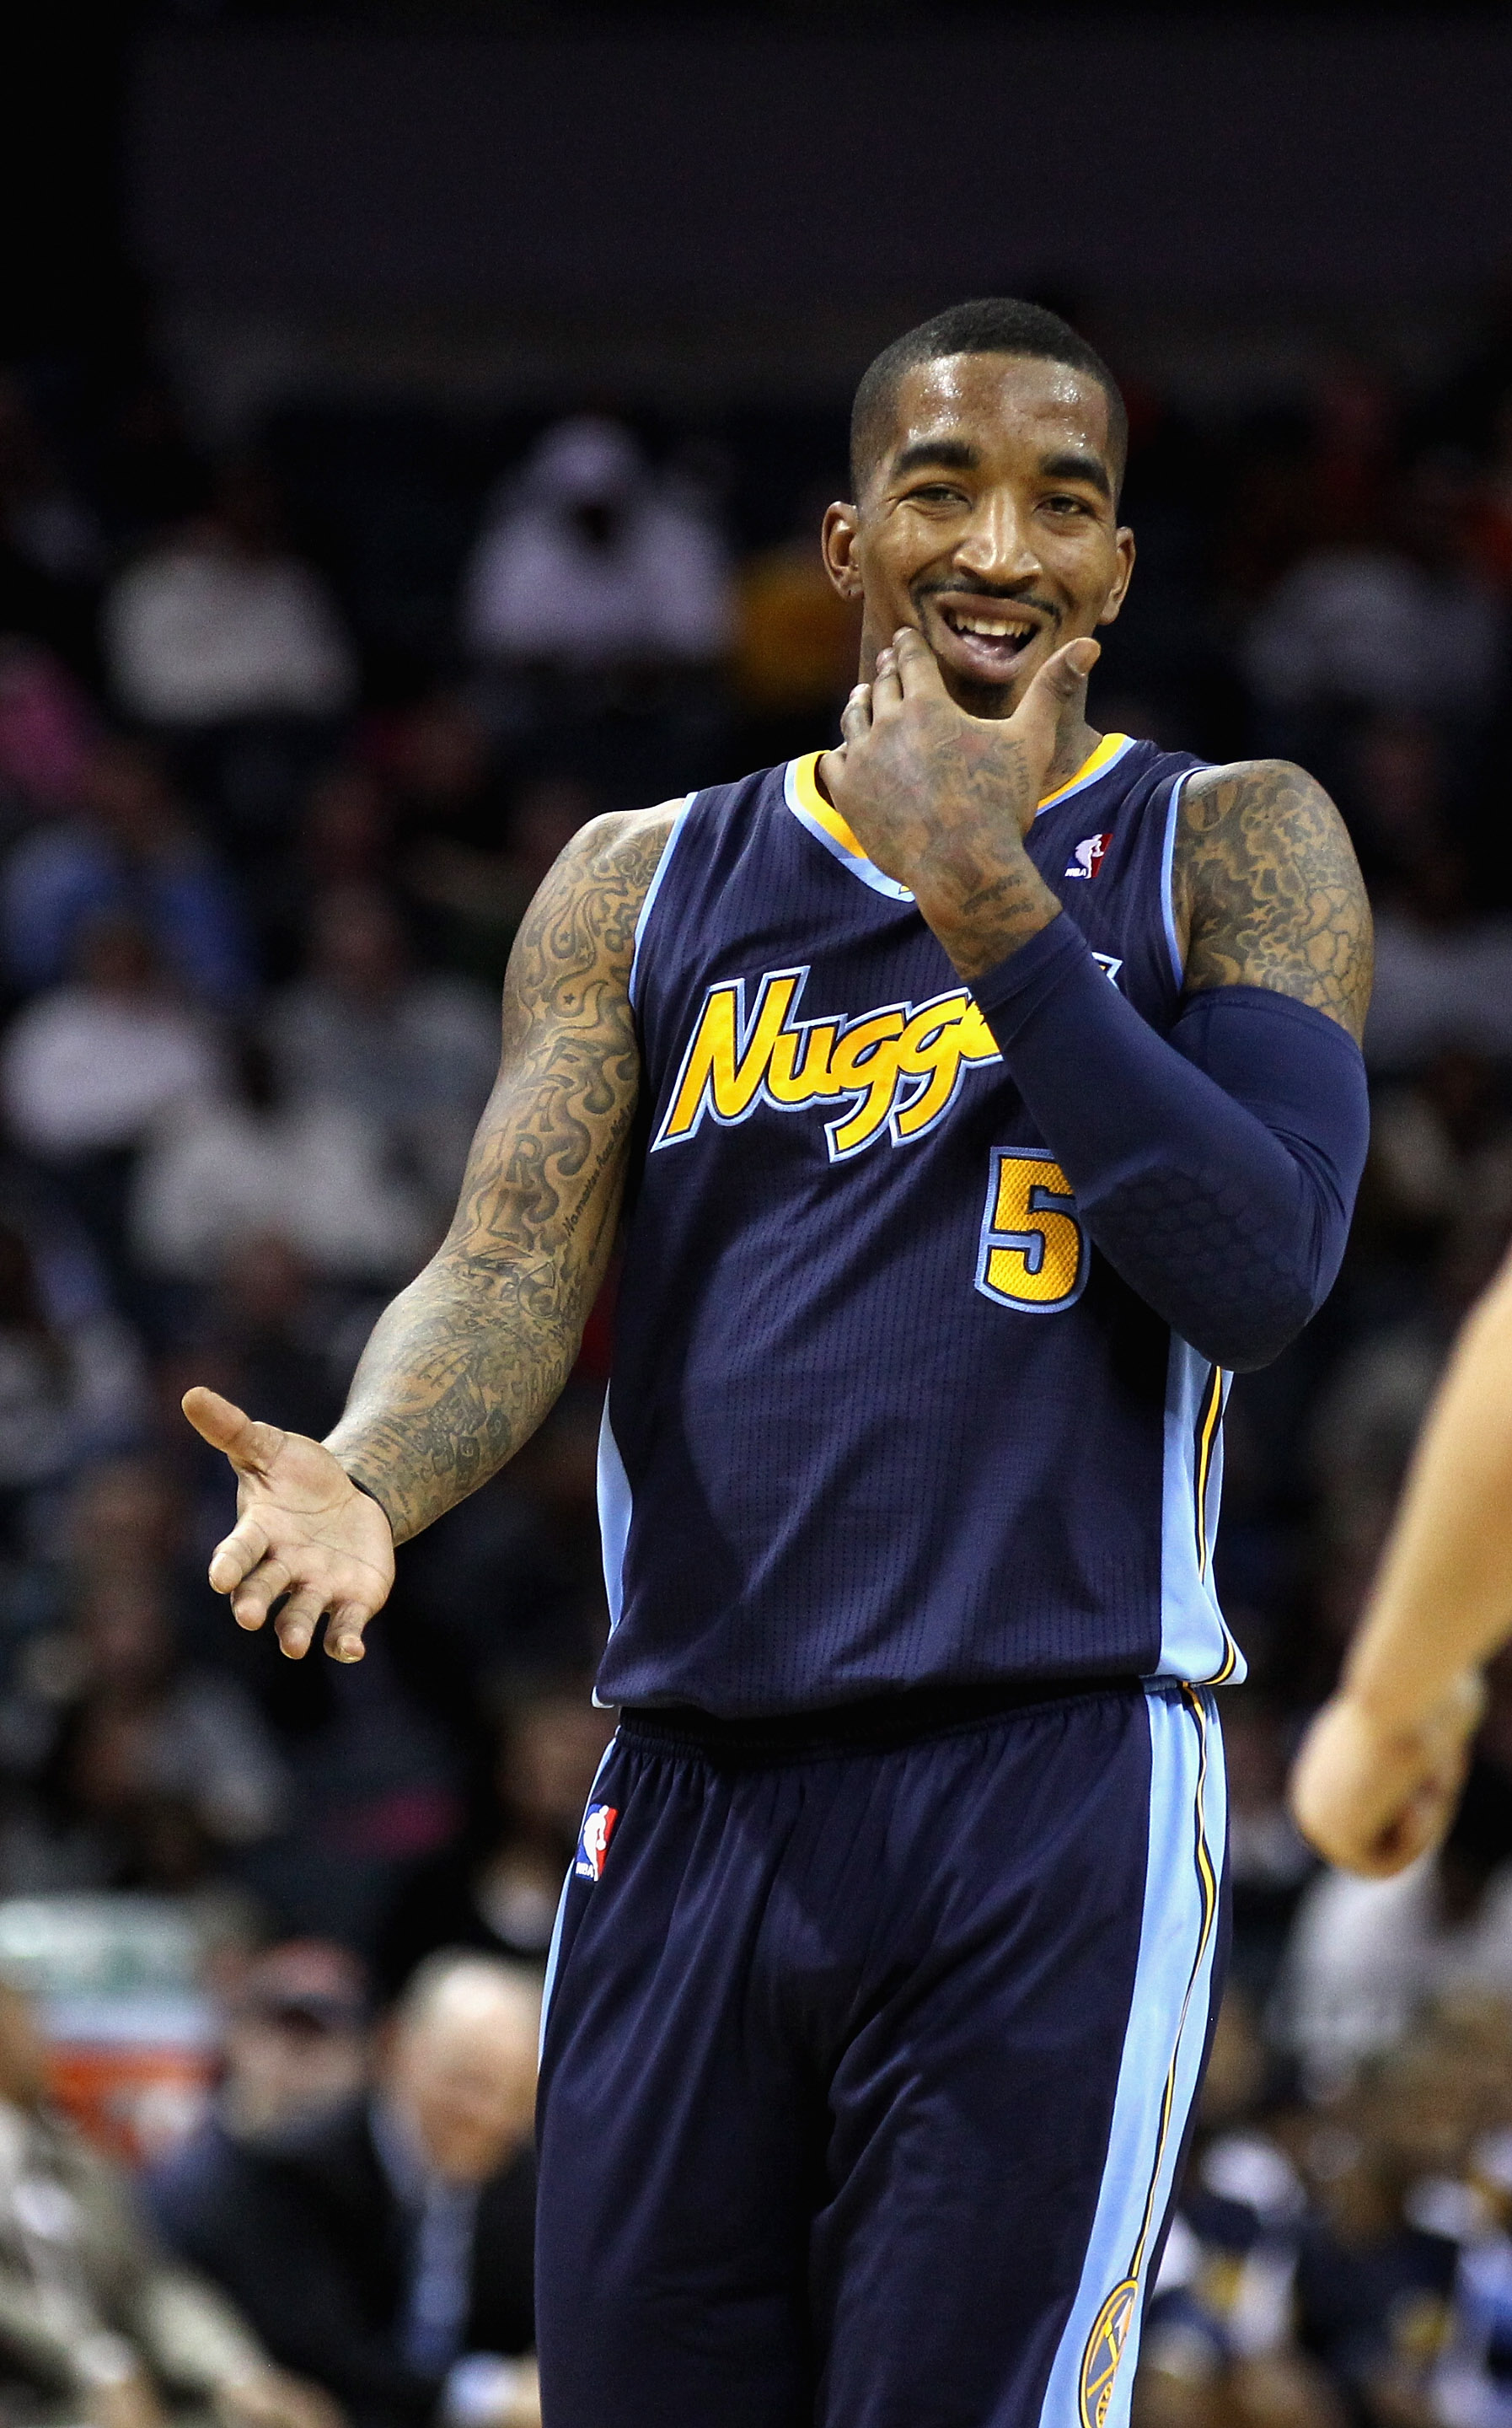 CHARLOTTE, NC - DECEMBER 07:  J.R. Smith #5 of the Denver Nuggets holds his jaw as he reacts to a call against the Charlotte Bobcats during their game at Time Warner Cable Arena on December 7, 2010 in Charlotte, North Carolina.  NOTE TO USER: User express